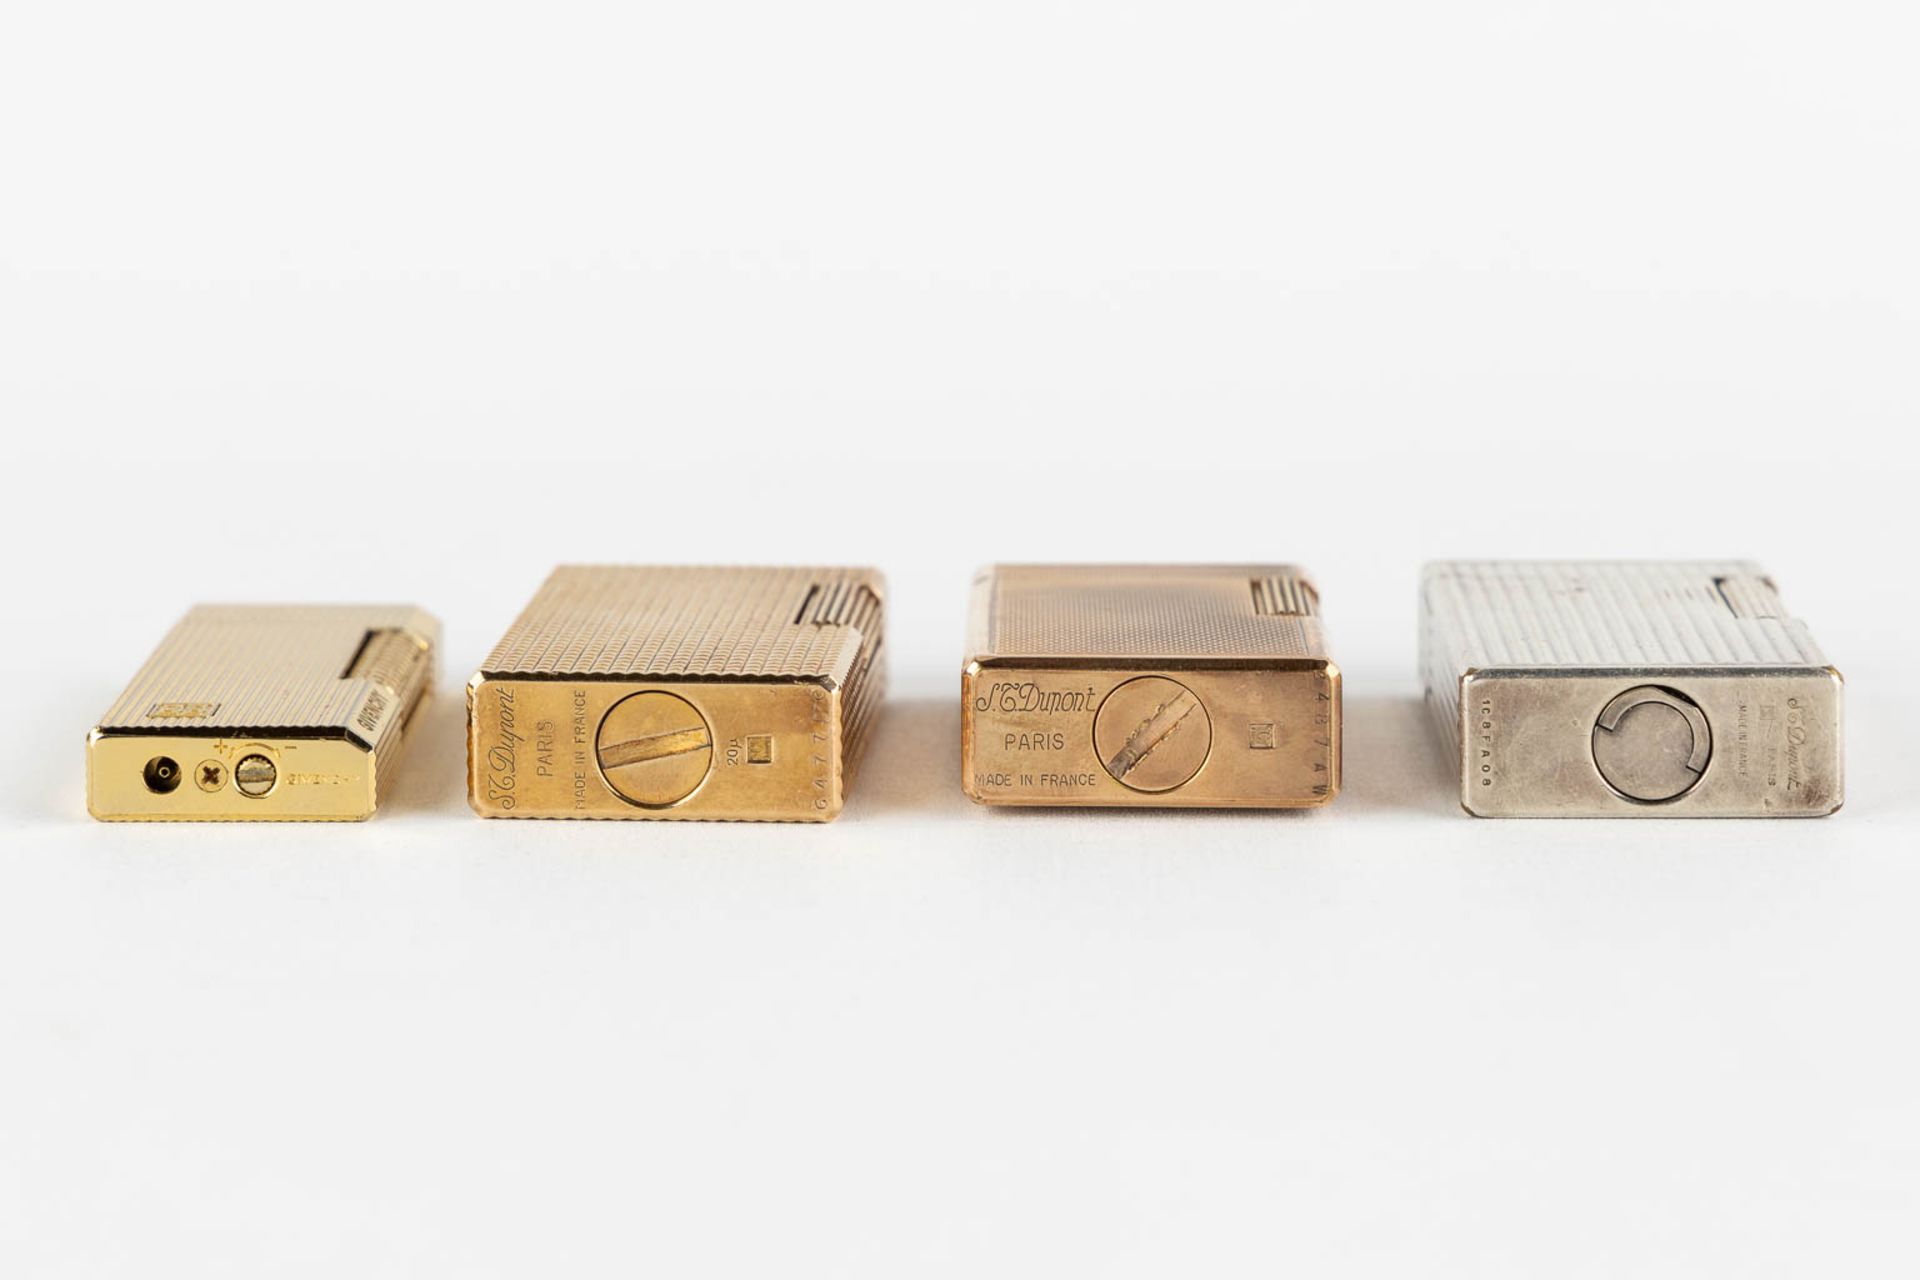 ST. Dupont, Three gold and silver plated lighters, added a Givency lighter. (L:1 x W:3,5 x H:6 cm) - Image 11 of 14